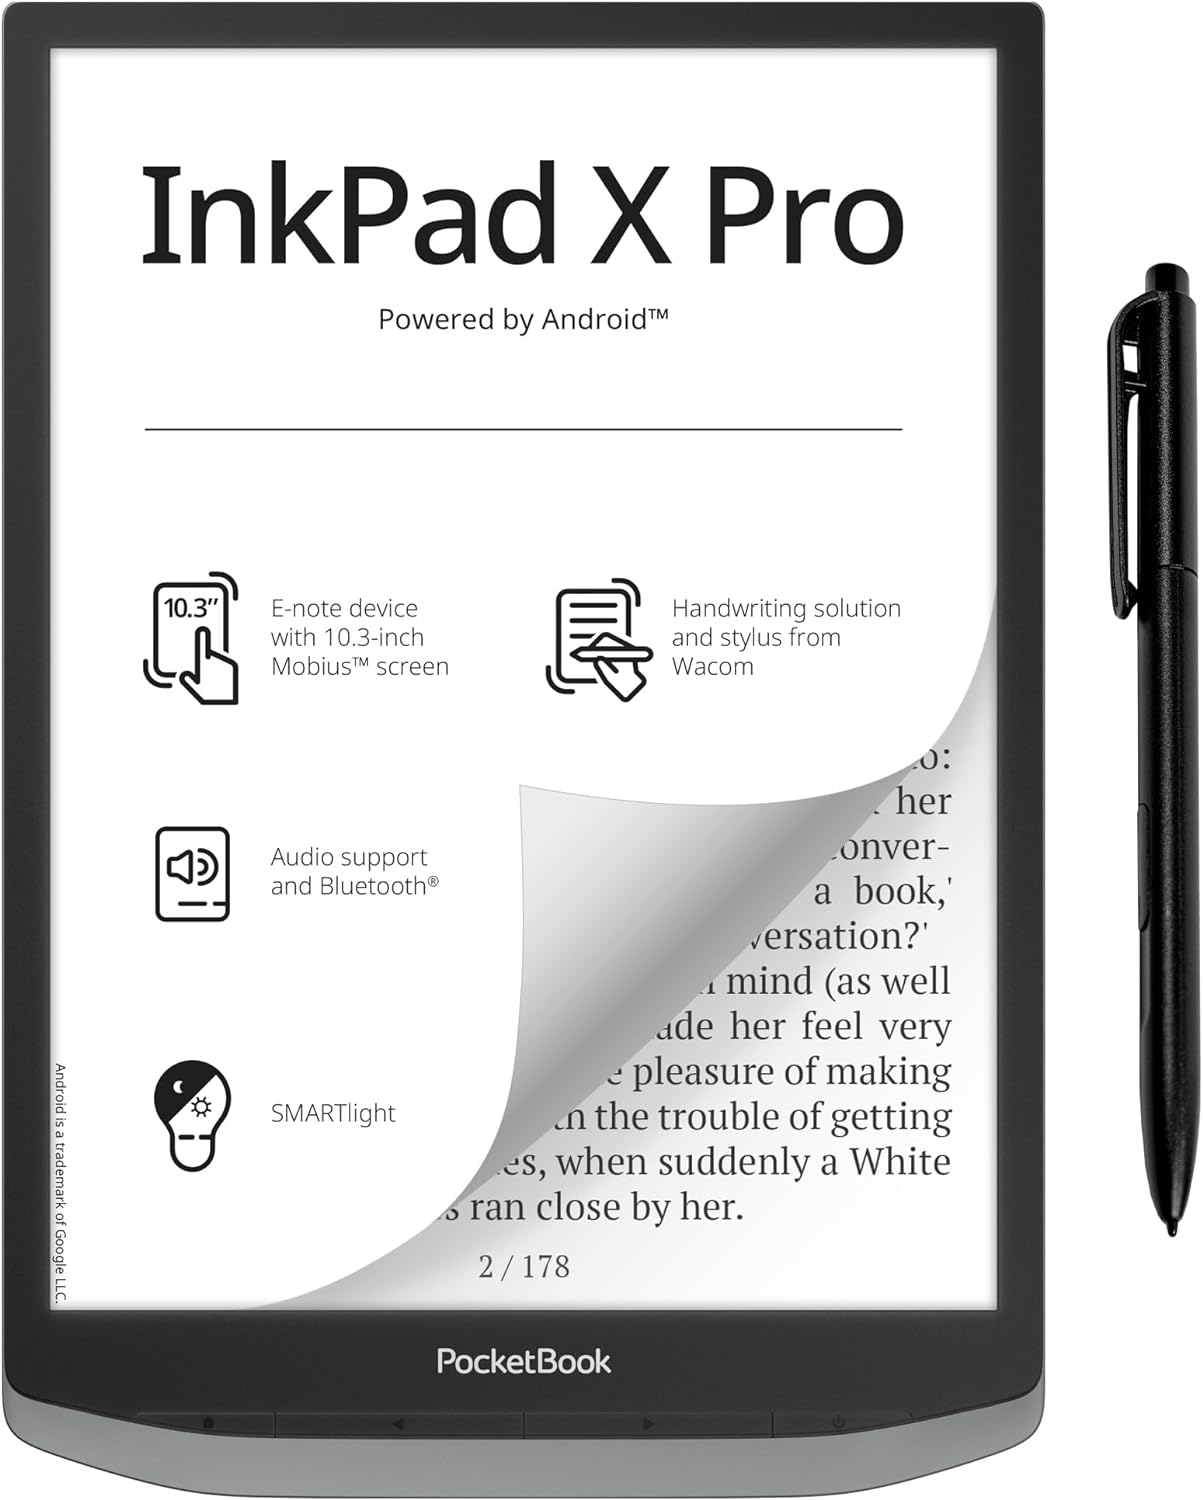 New 10.3″ PocketBook InkPad X Pro Now Available on